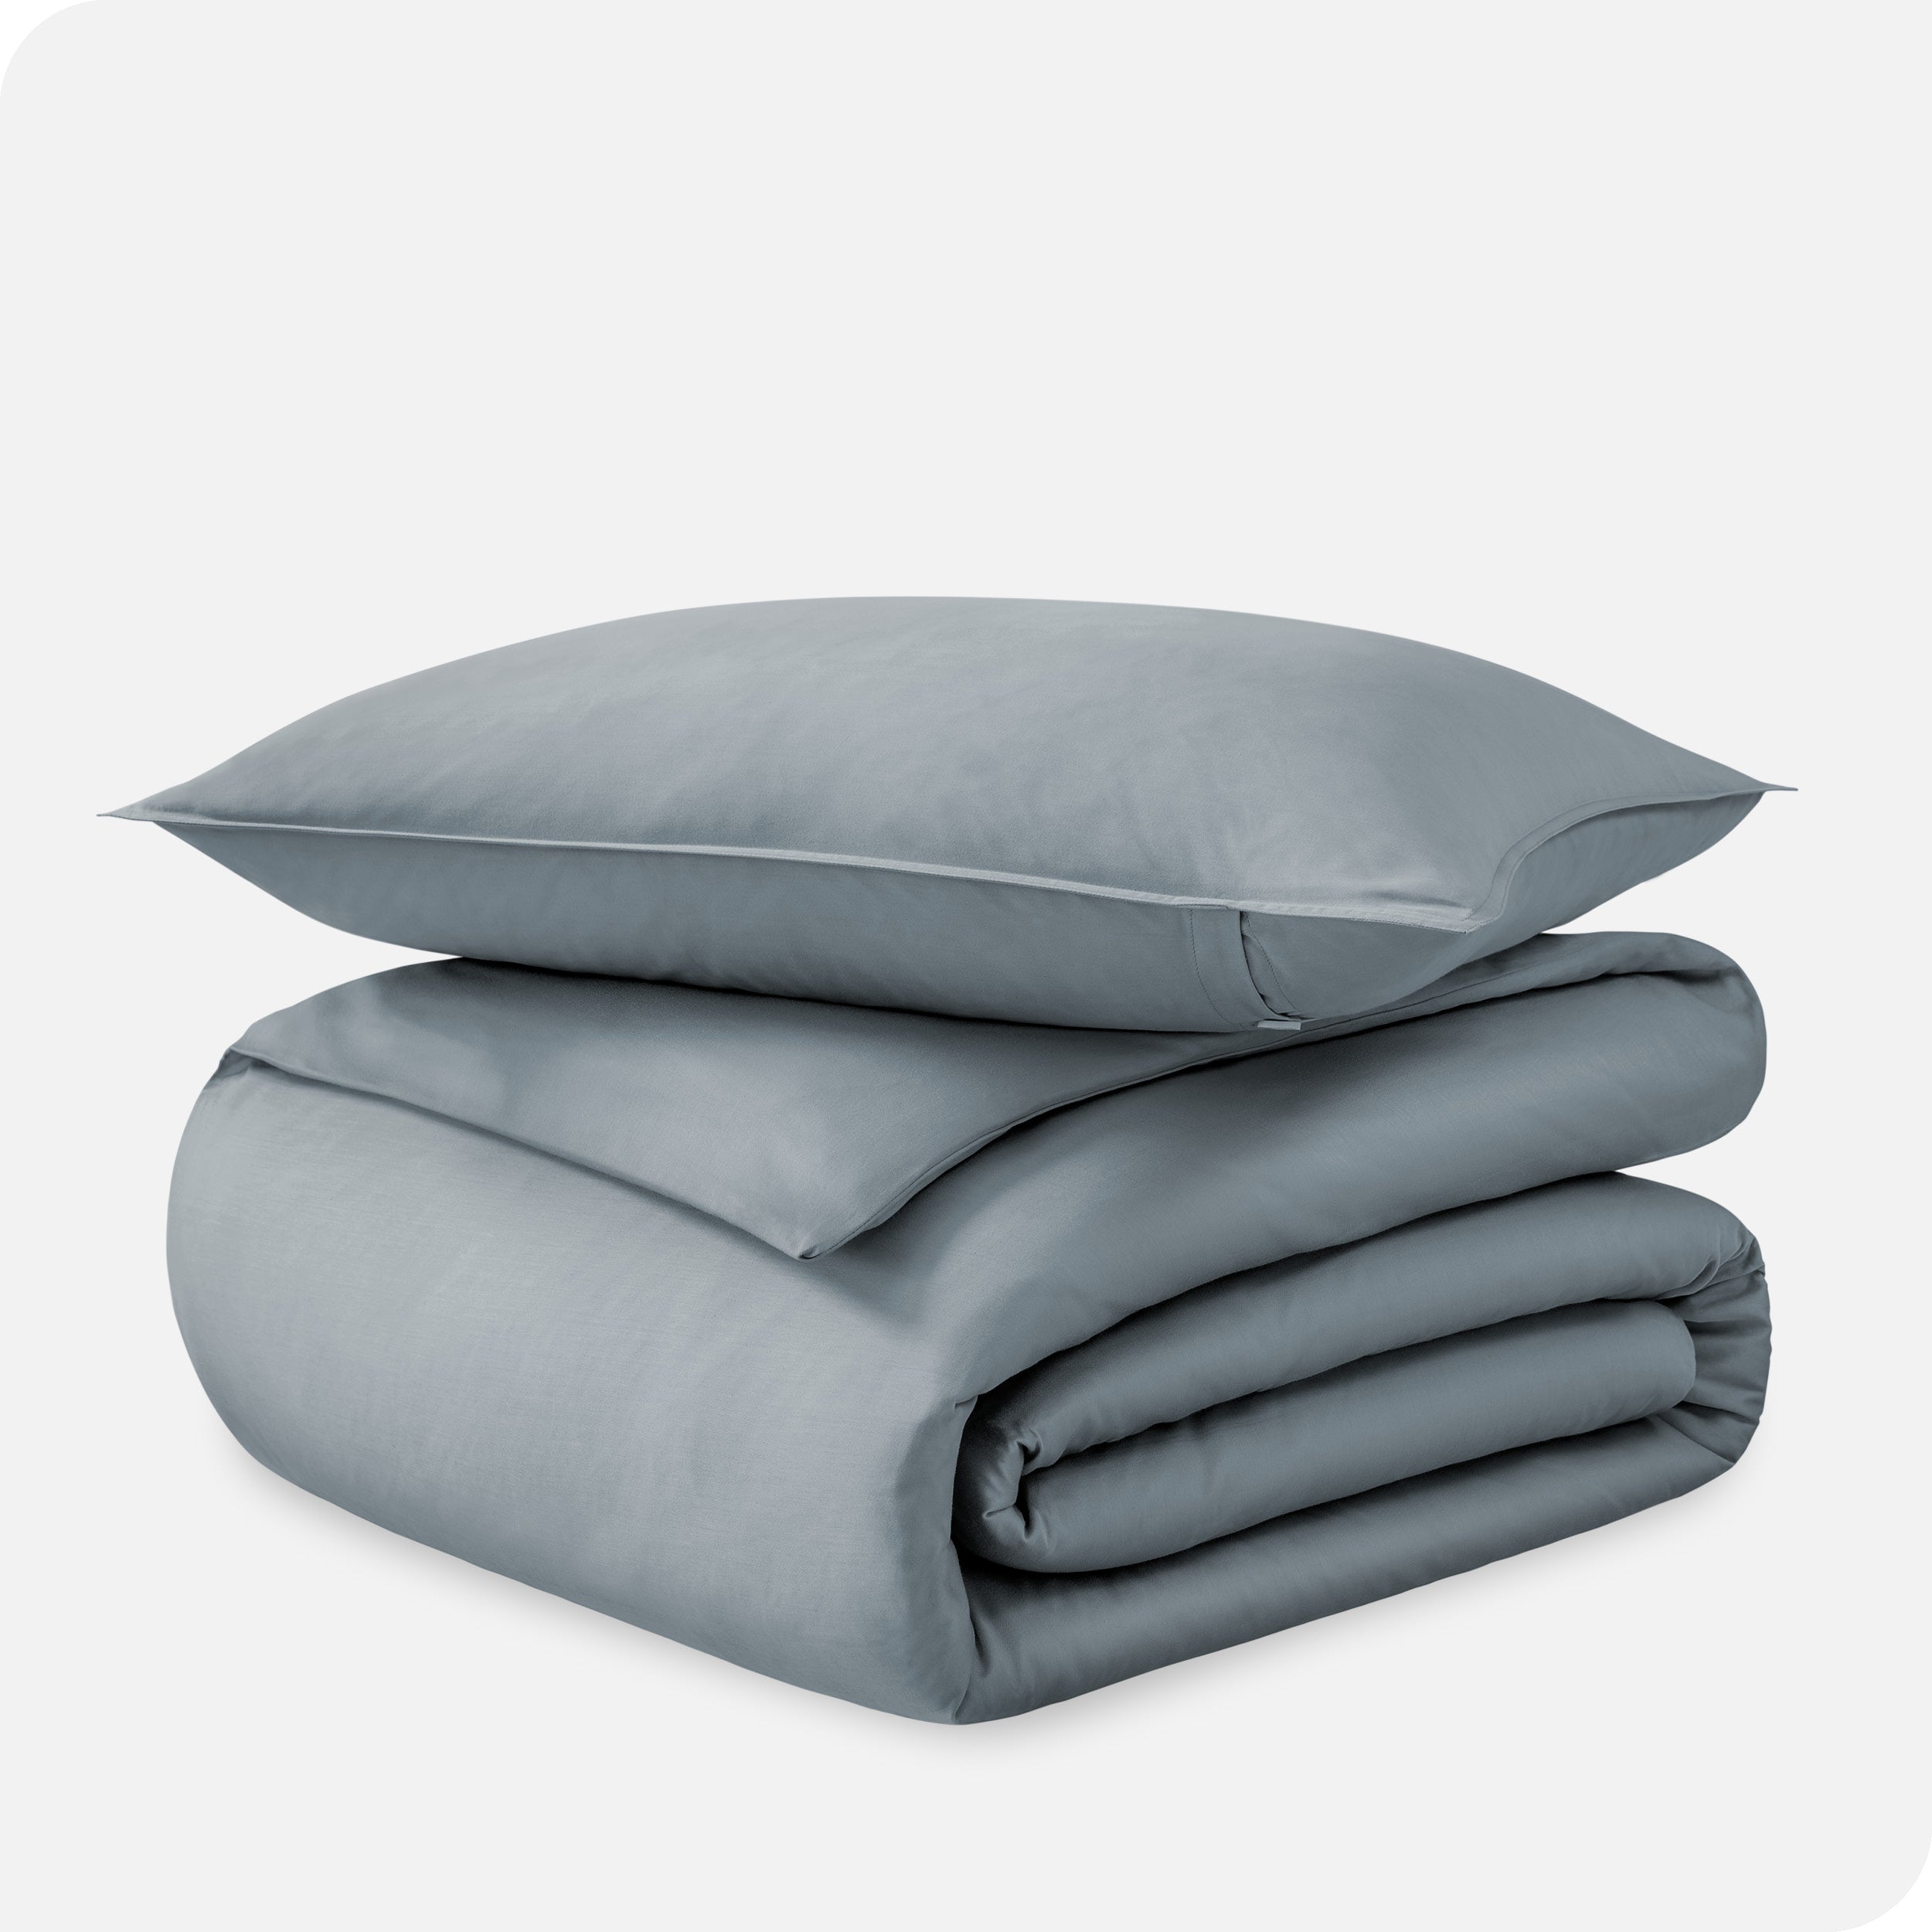 A folded organic sateen duvet cover with a pillow on top.